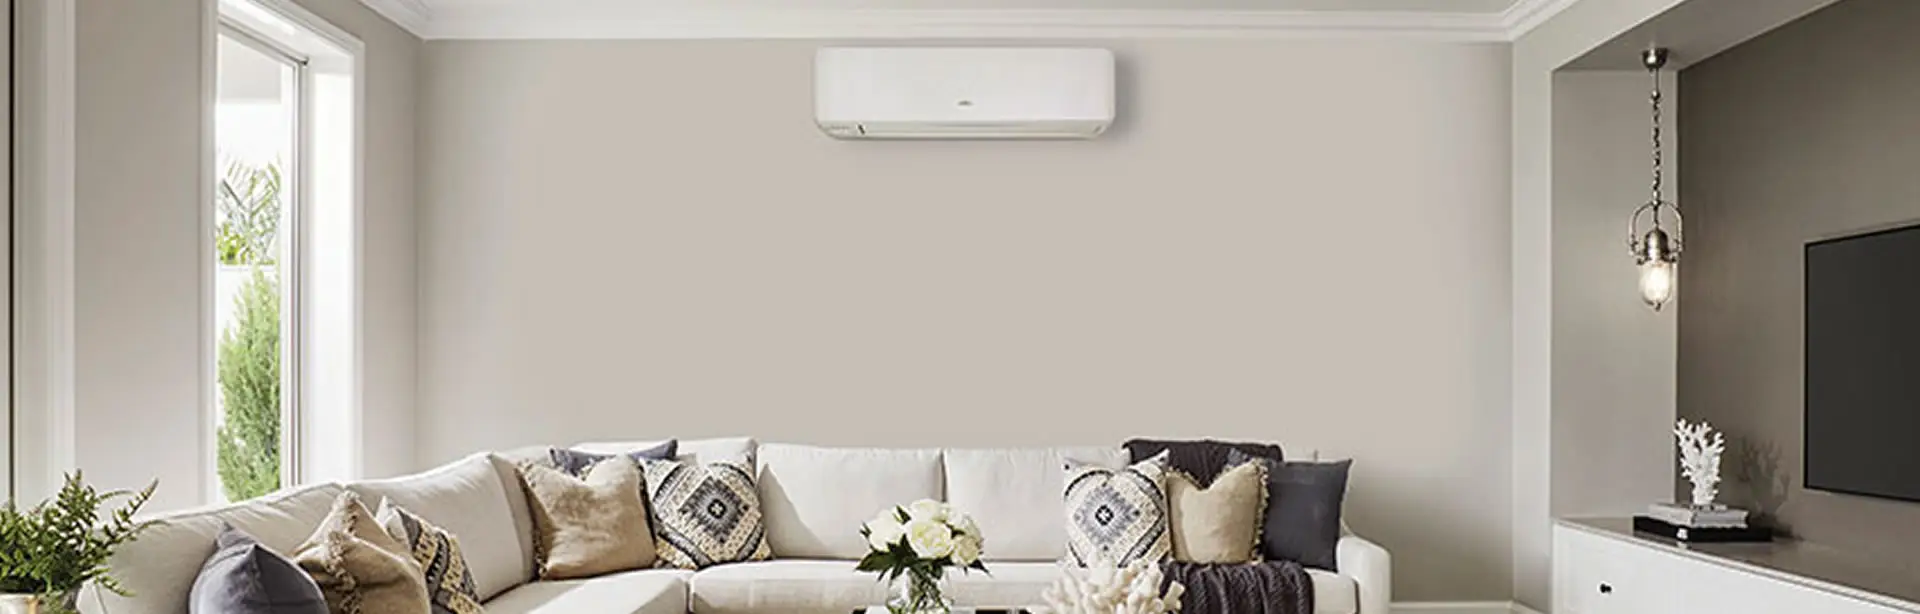 Heat Pump Air Conditioning Services For Better Air